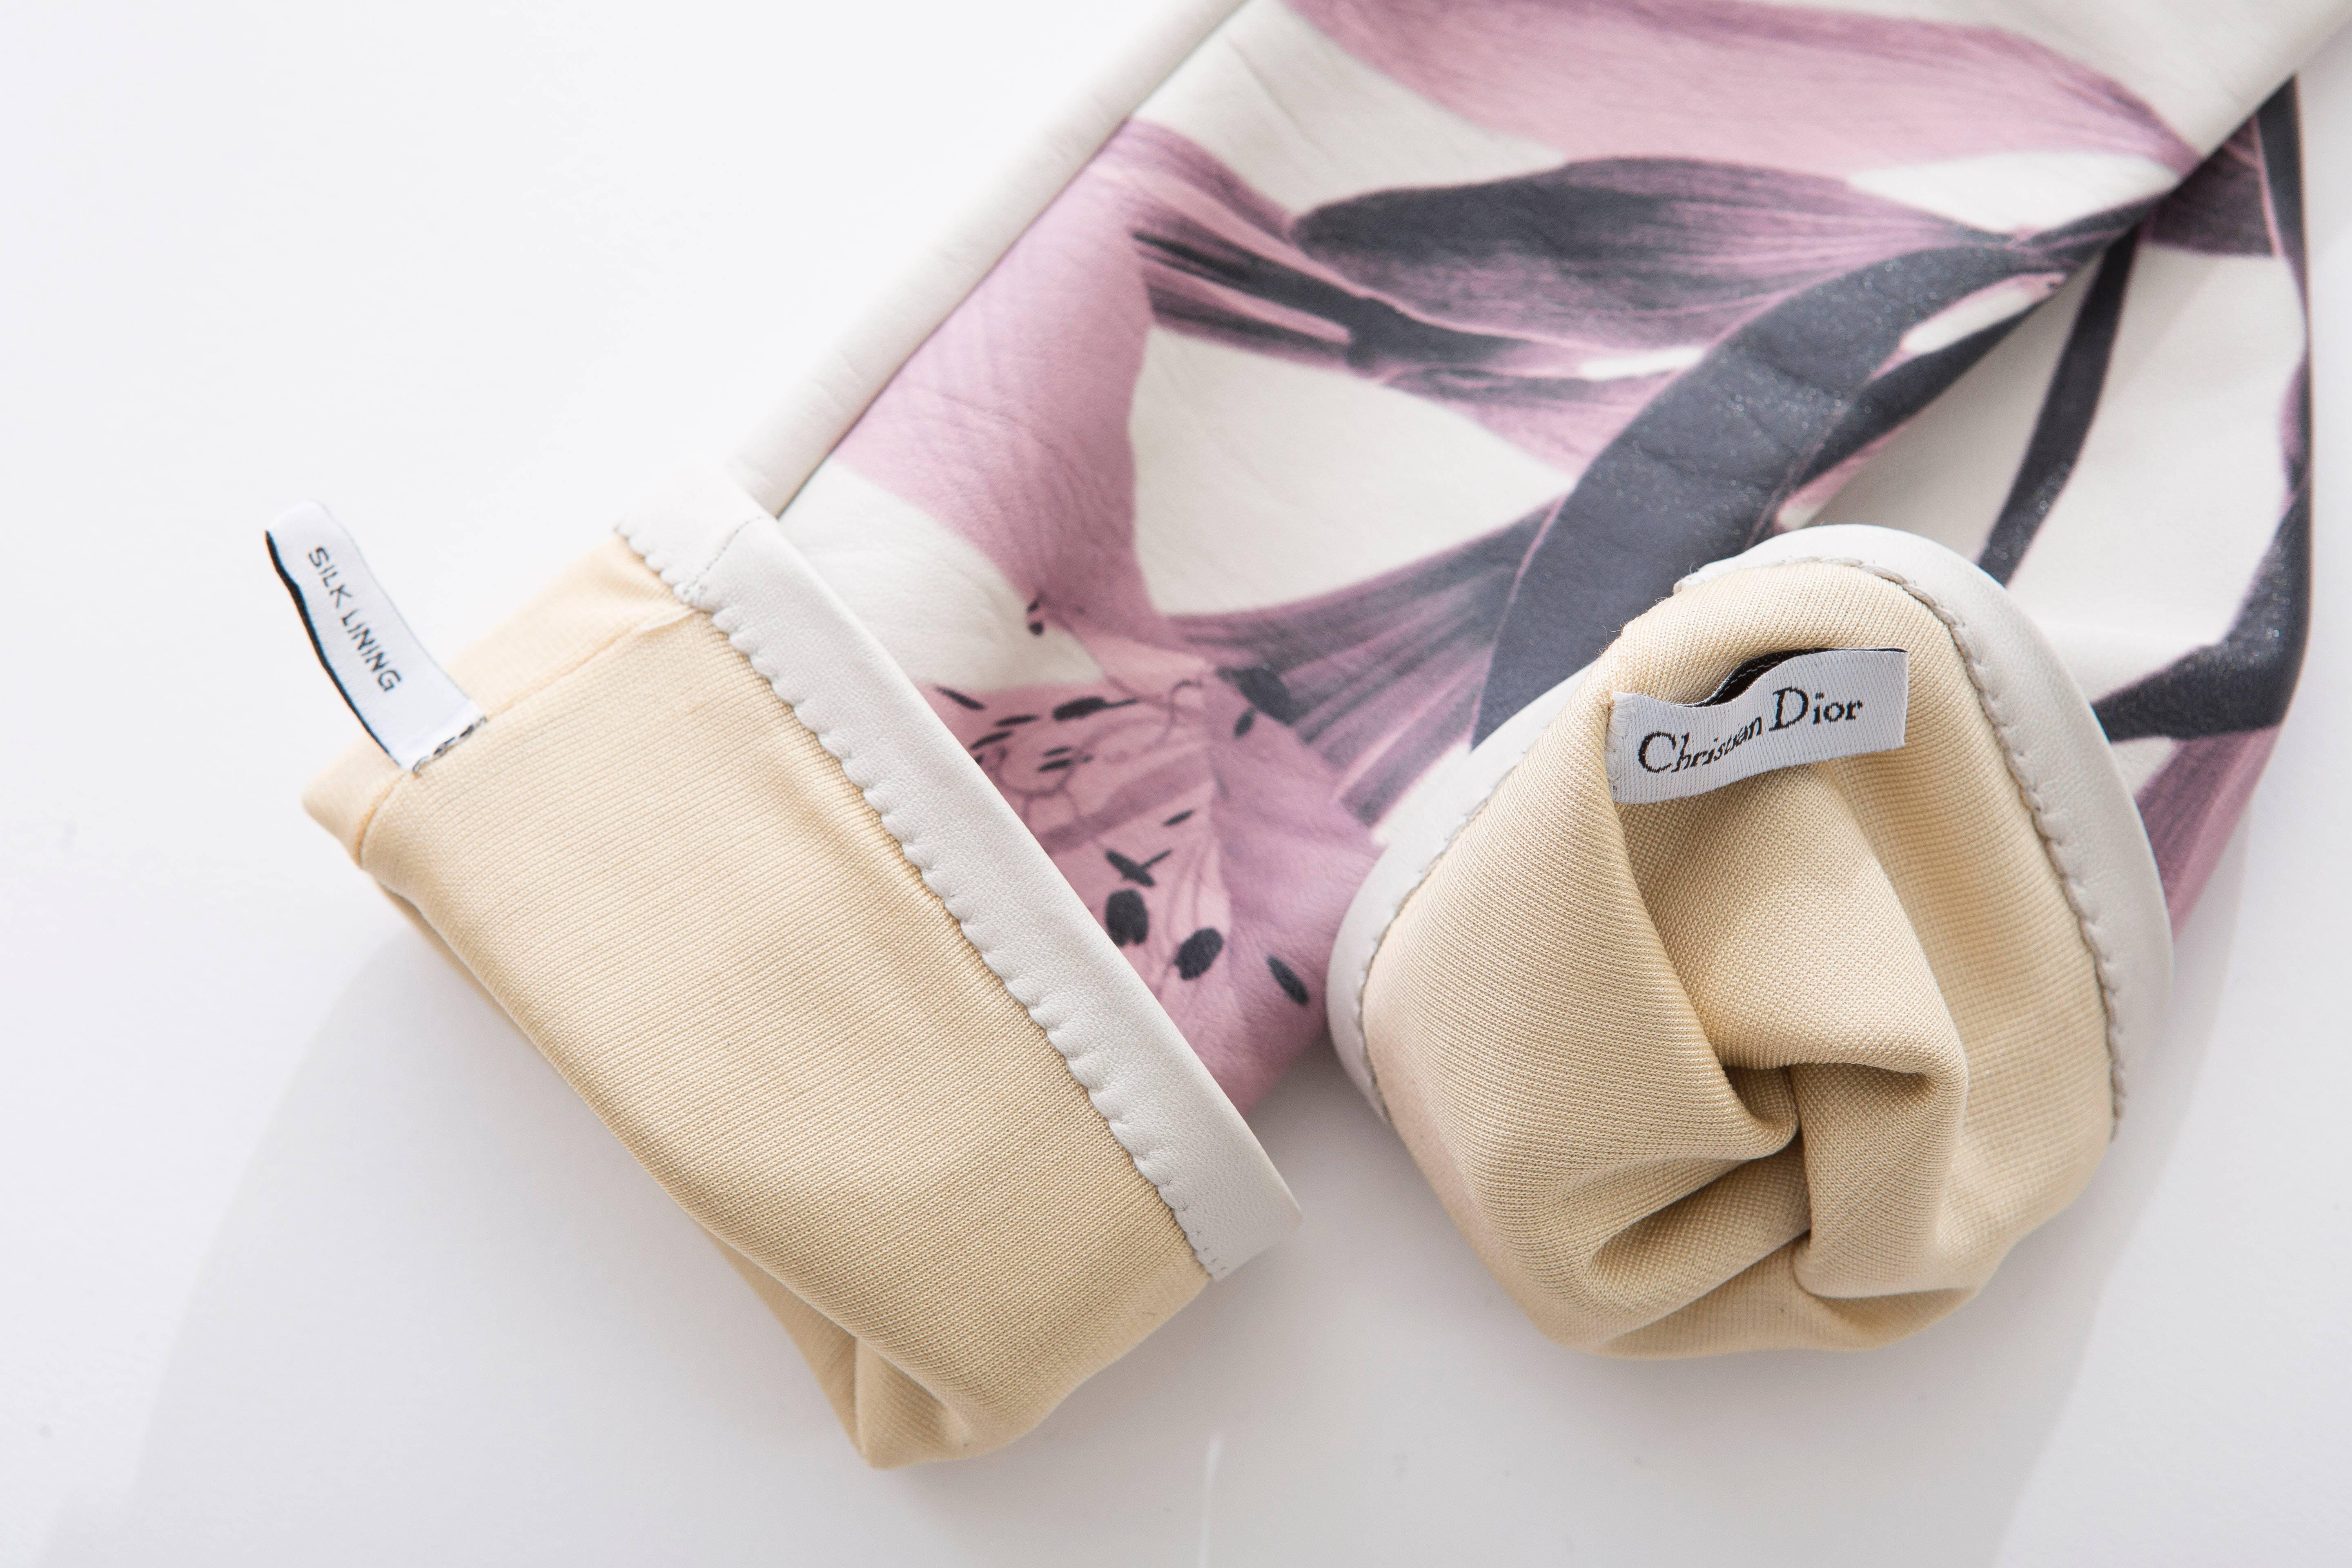  Raf Simons Christian Dior Ivory Printed Leather Gloves, Pre - Fall 2014 1